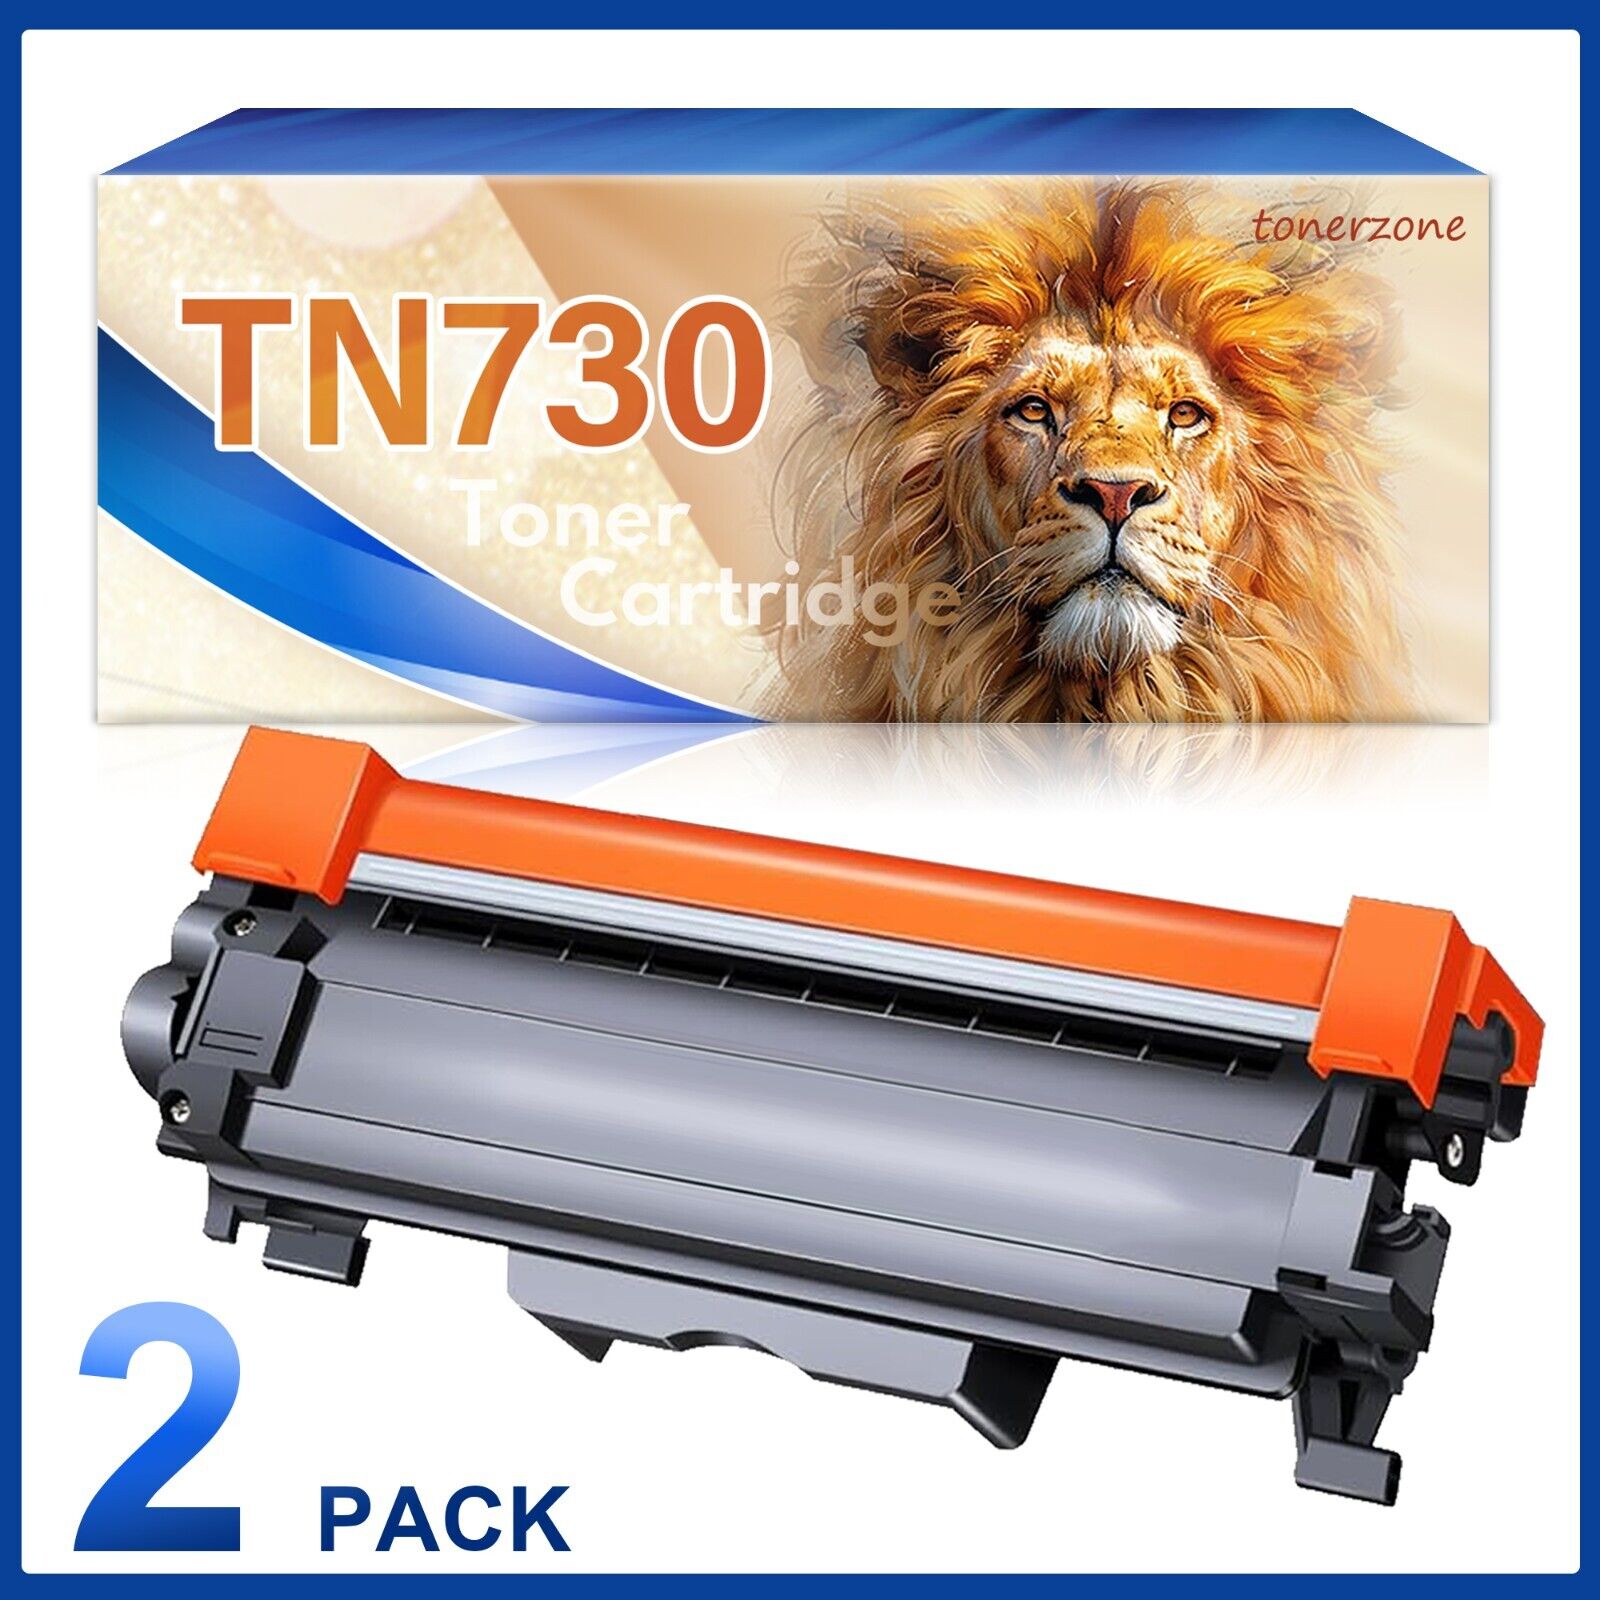 TN730 2Black Toner Cartridge Replacement for Brother  DCP-L2550DW Printer